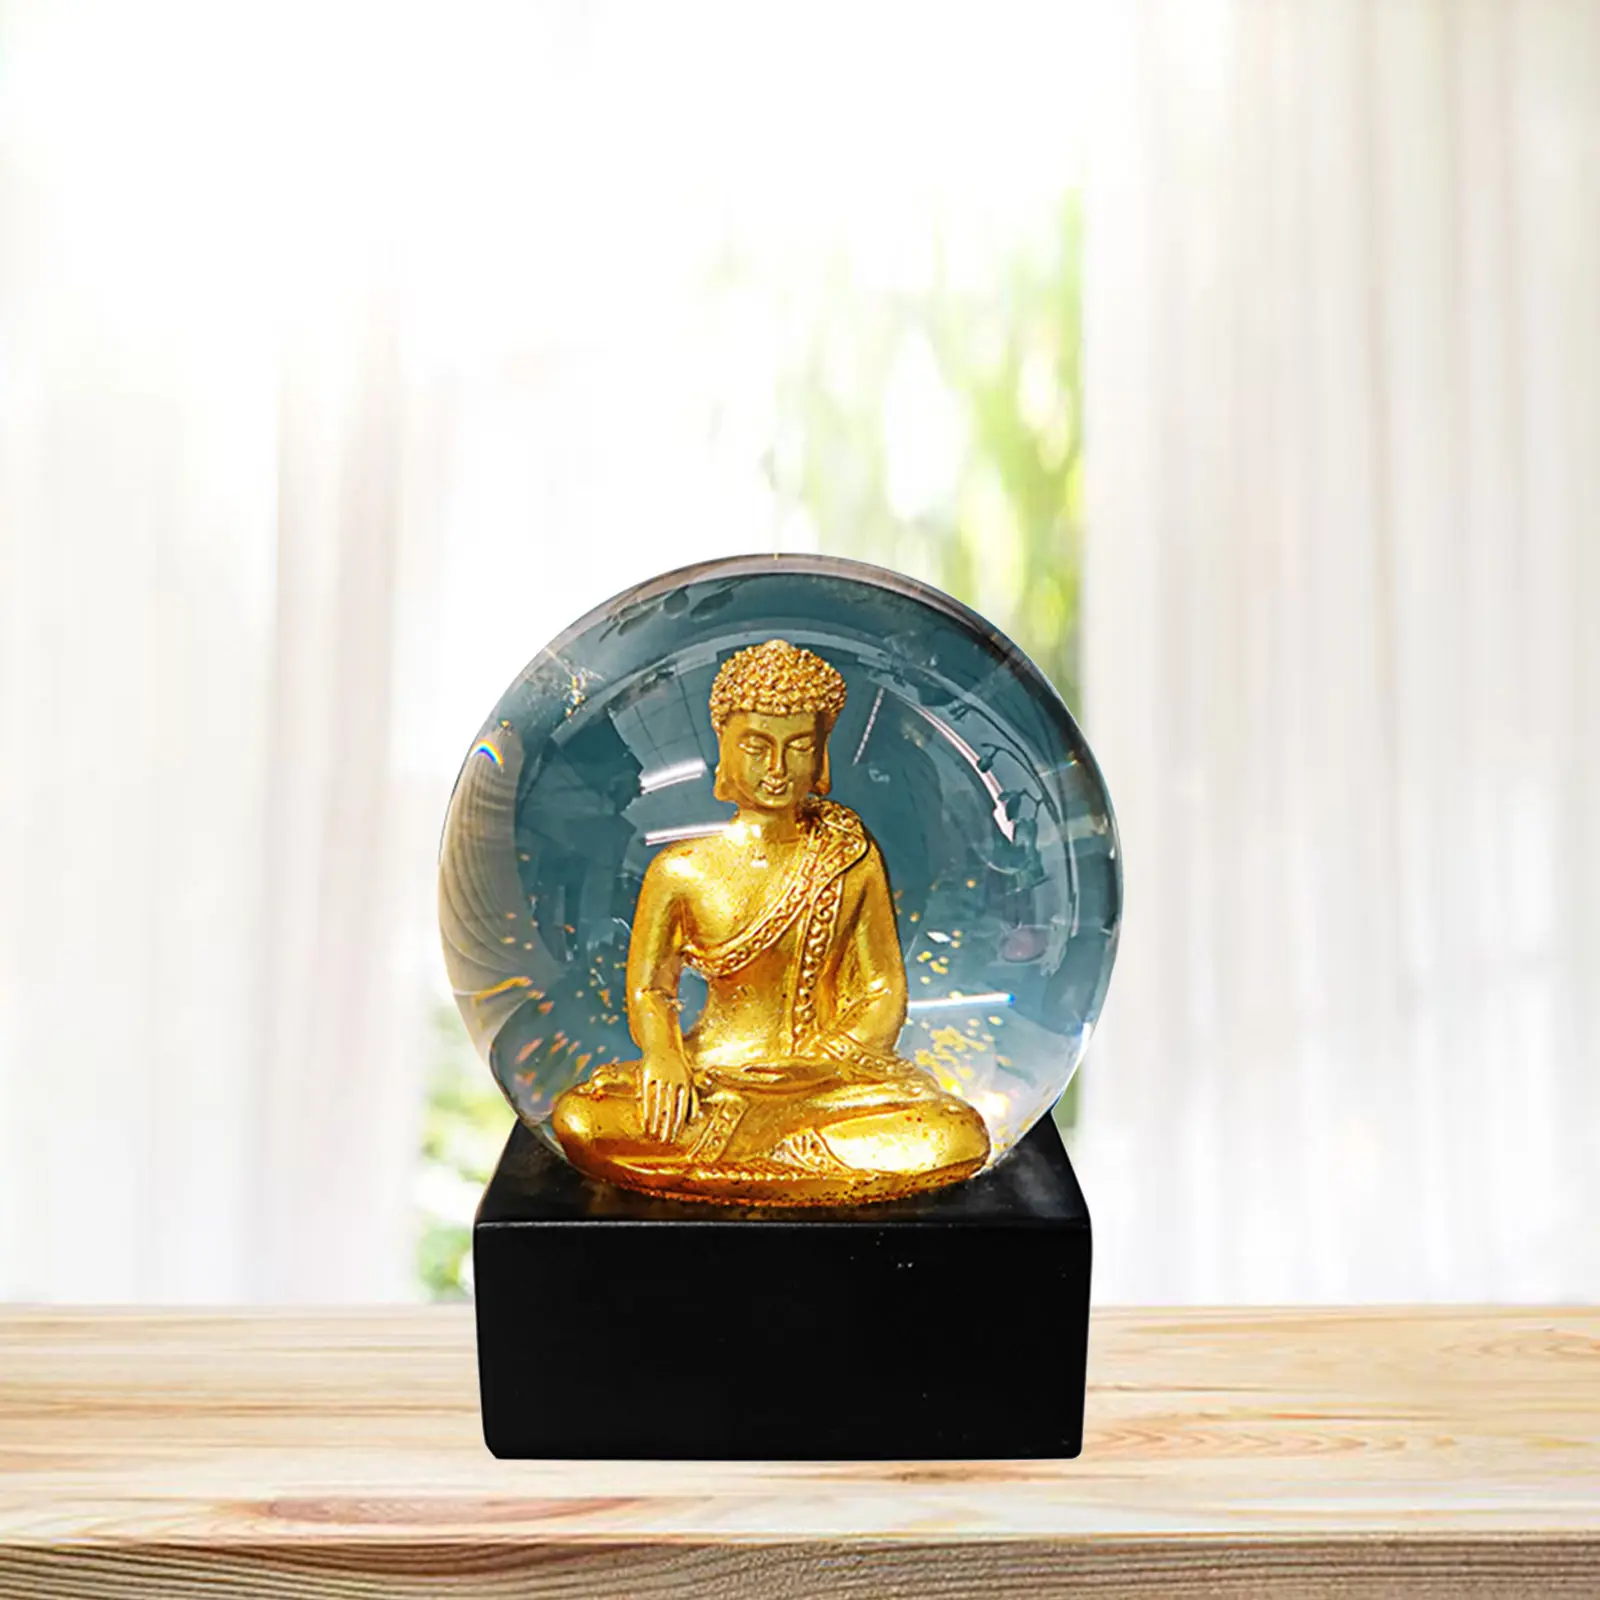 Seated Buddha Statue Buddhism Thai Meditating Home and Garden Decorative Sculpture Collectibles Figurines